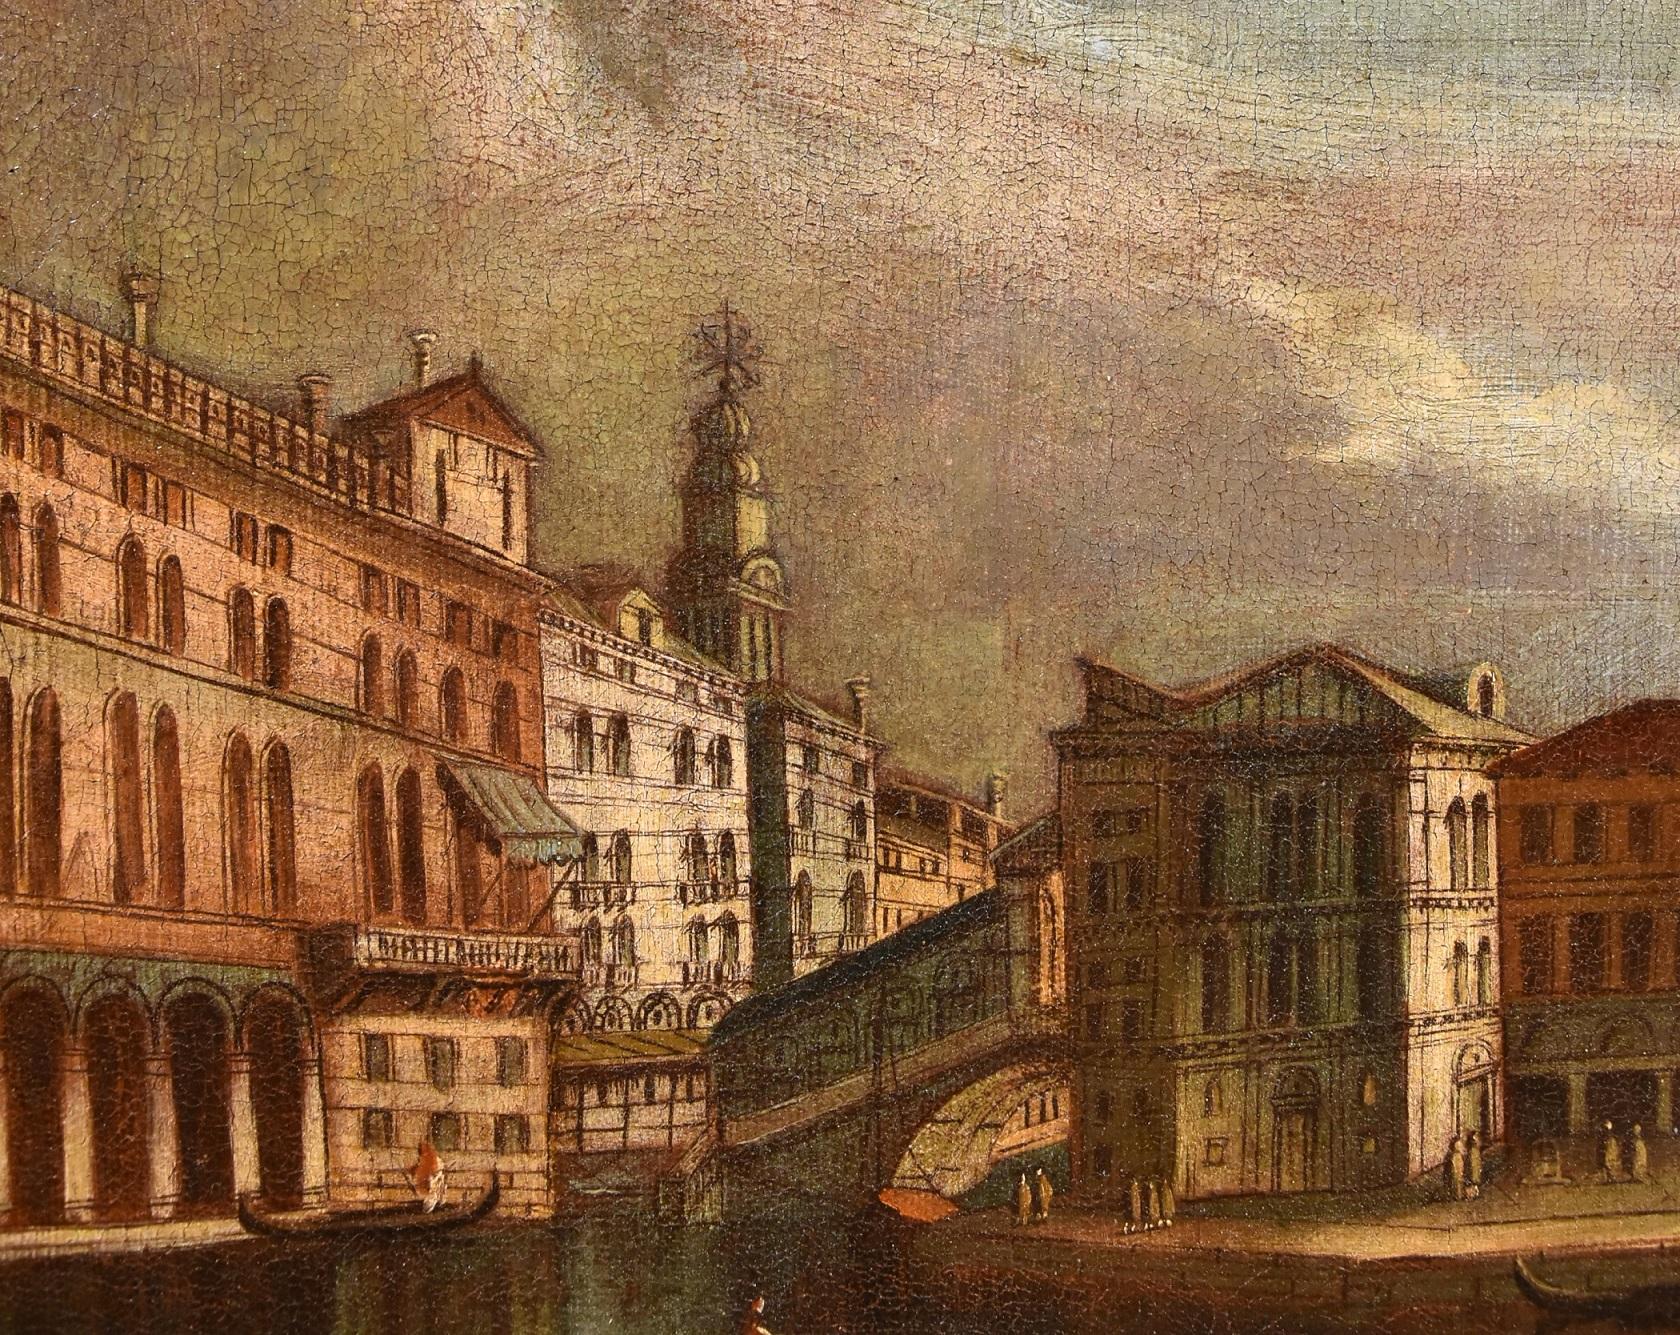 Tironi Venice Grand Canal Landscape Paint Oil on canvas Old master 18th Century 7